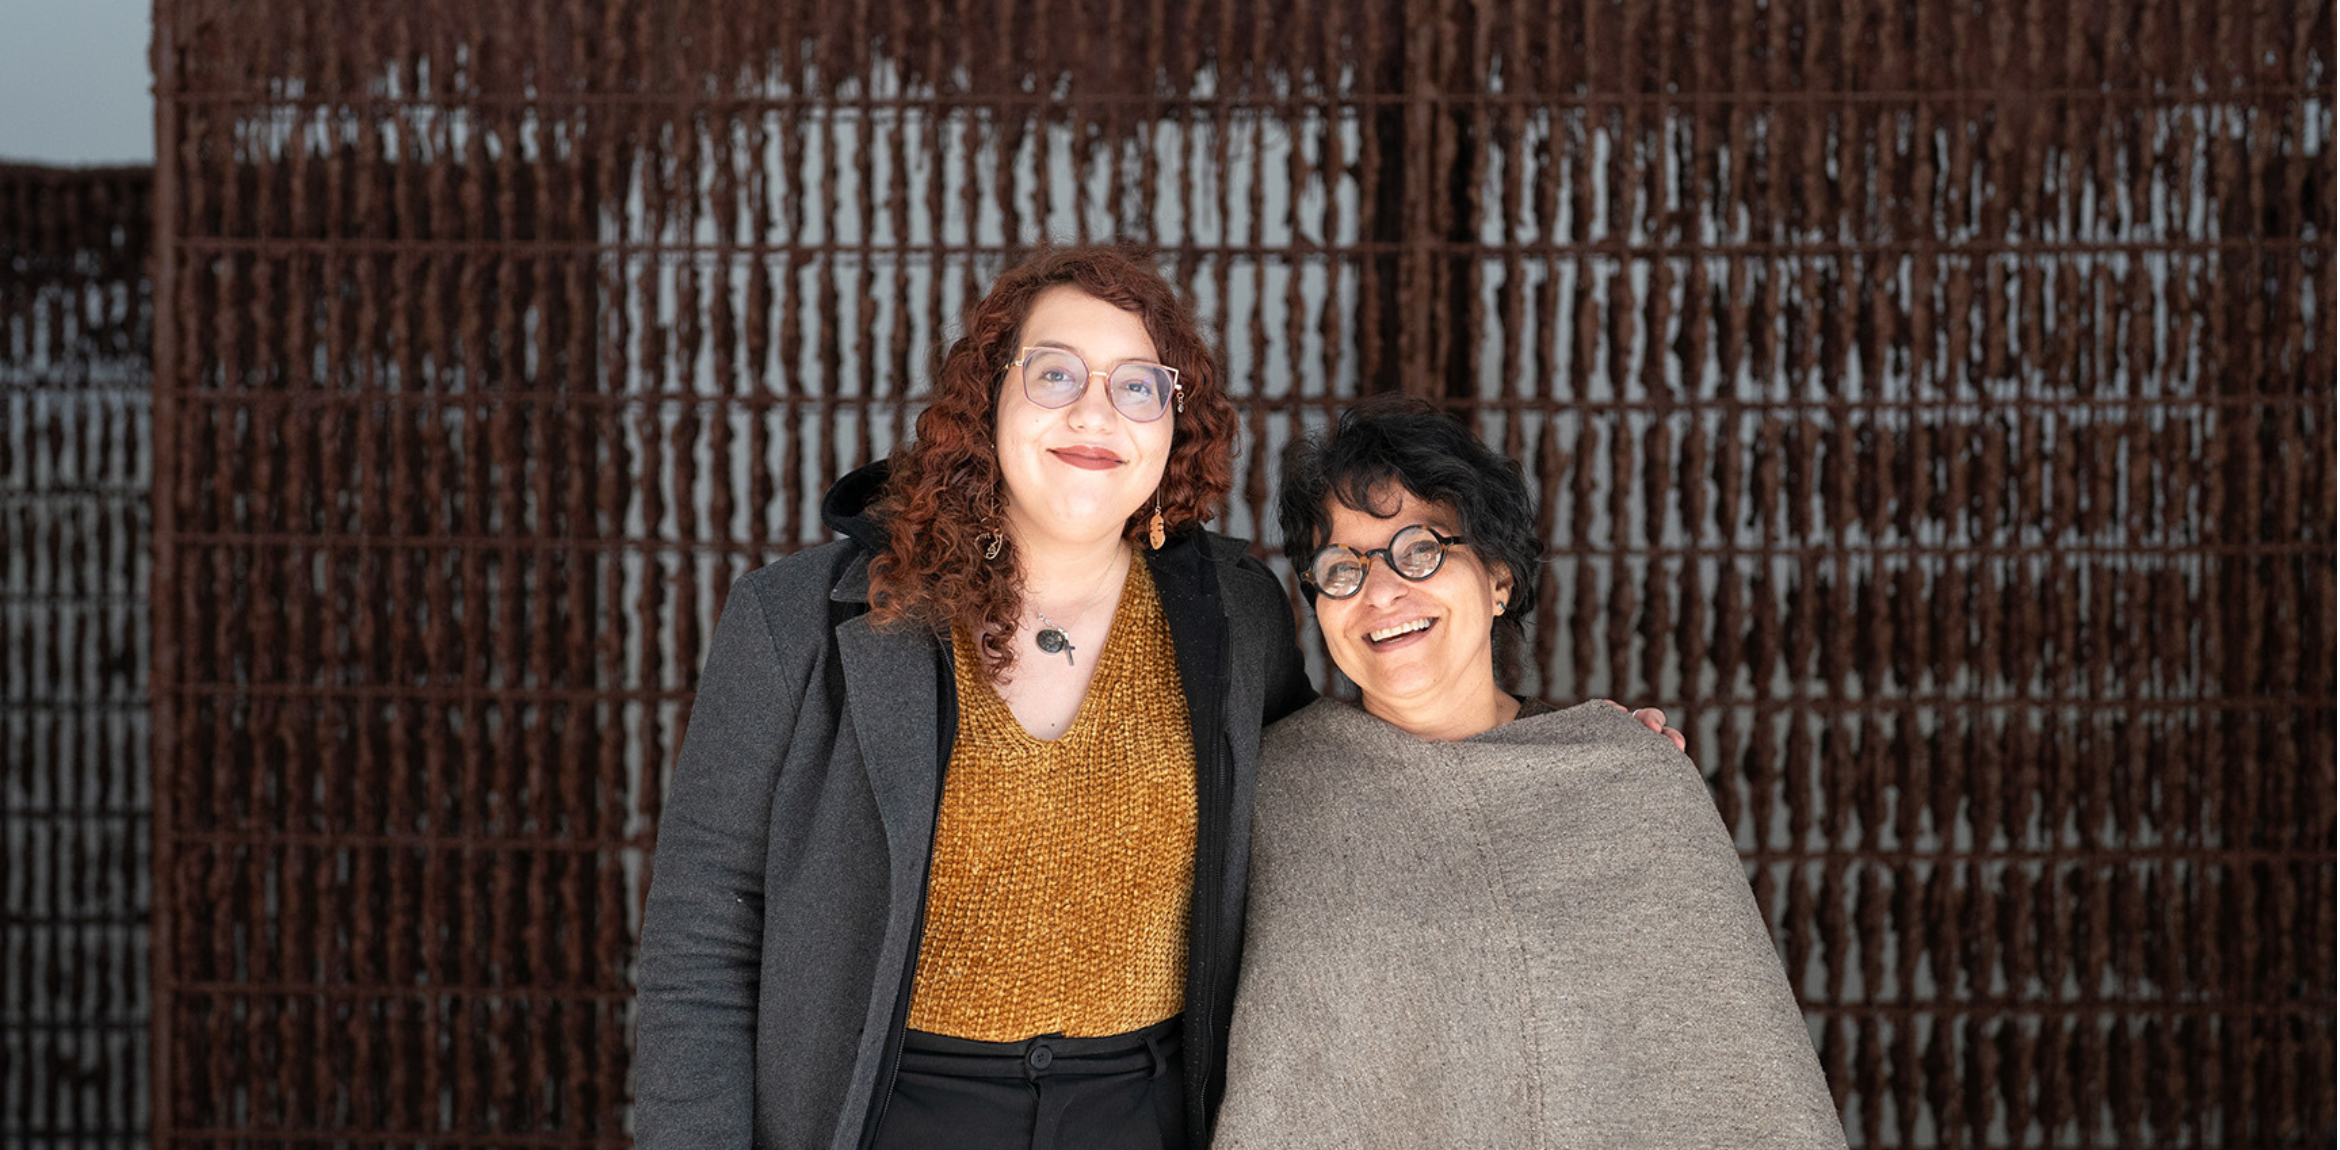 The image shows two smiling individuals standing close together against a background of a textured, vertical grid-like structure. The person on the left has curly red hair, wears glasses, and is dressed in a dark coat over a gold-colored top. The person on the right has short black hair, wears glasses, and is dressed in a beige wrap or shawl.